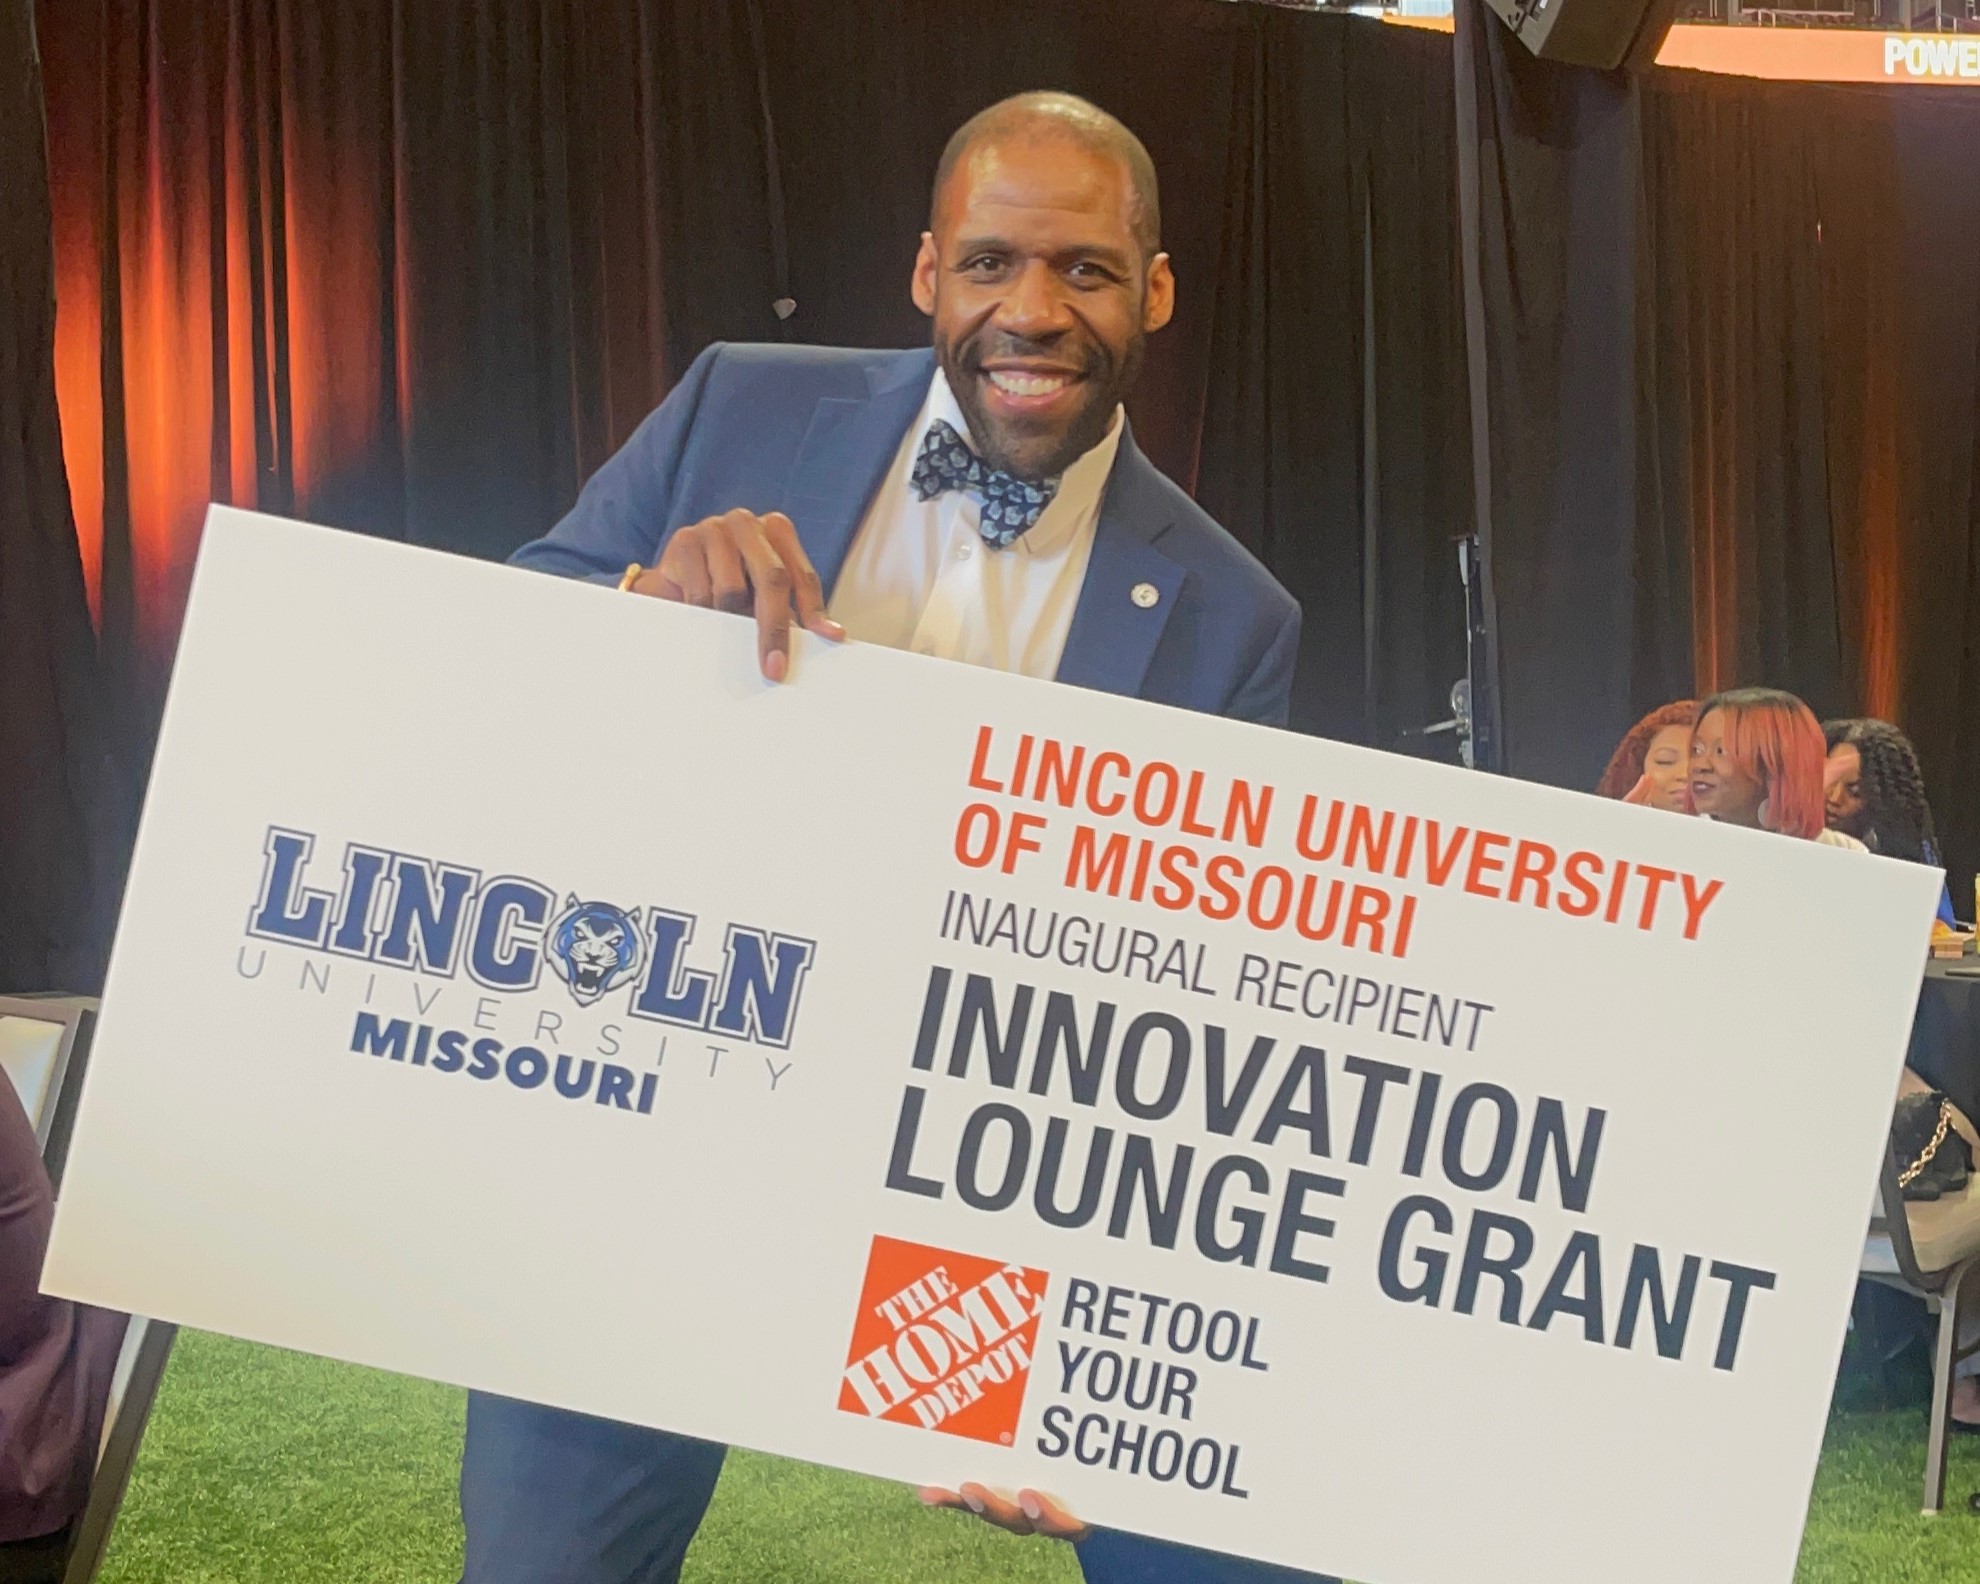 Jeremy Faulk, LU chief of staff, received the 2023 Innovation Grant from Home Depot as part of their Retool Your School campaign.